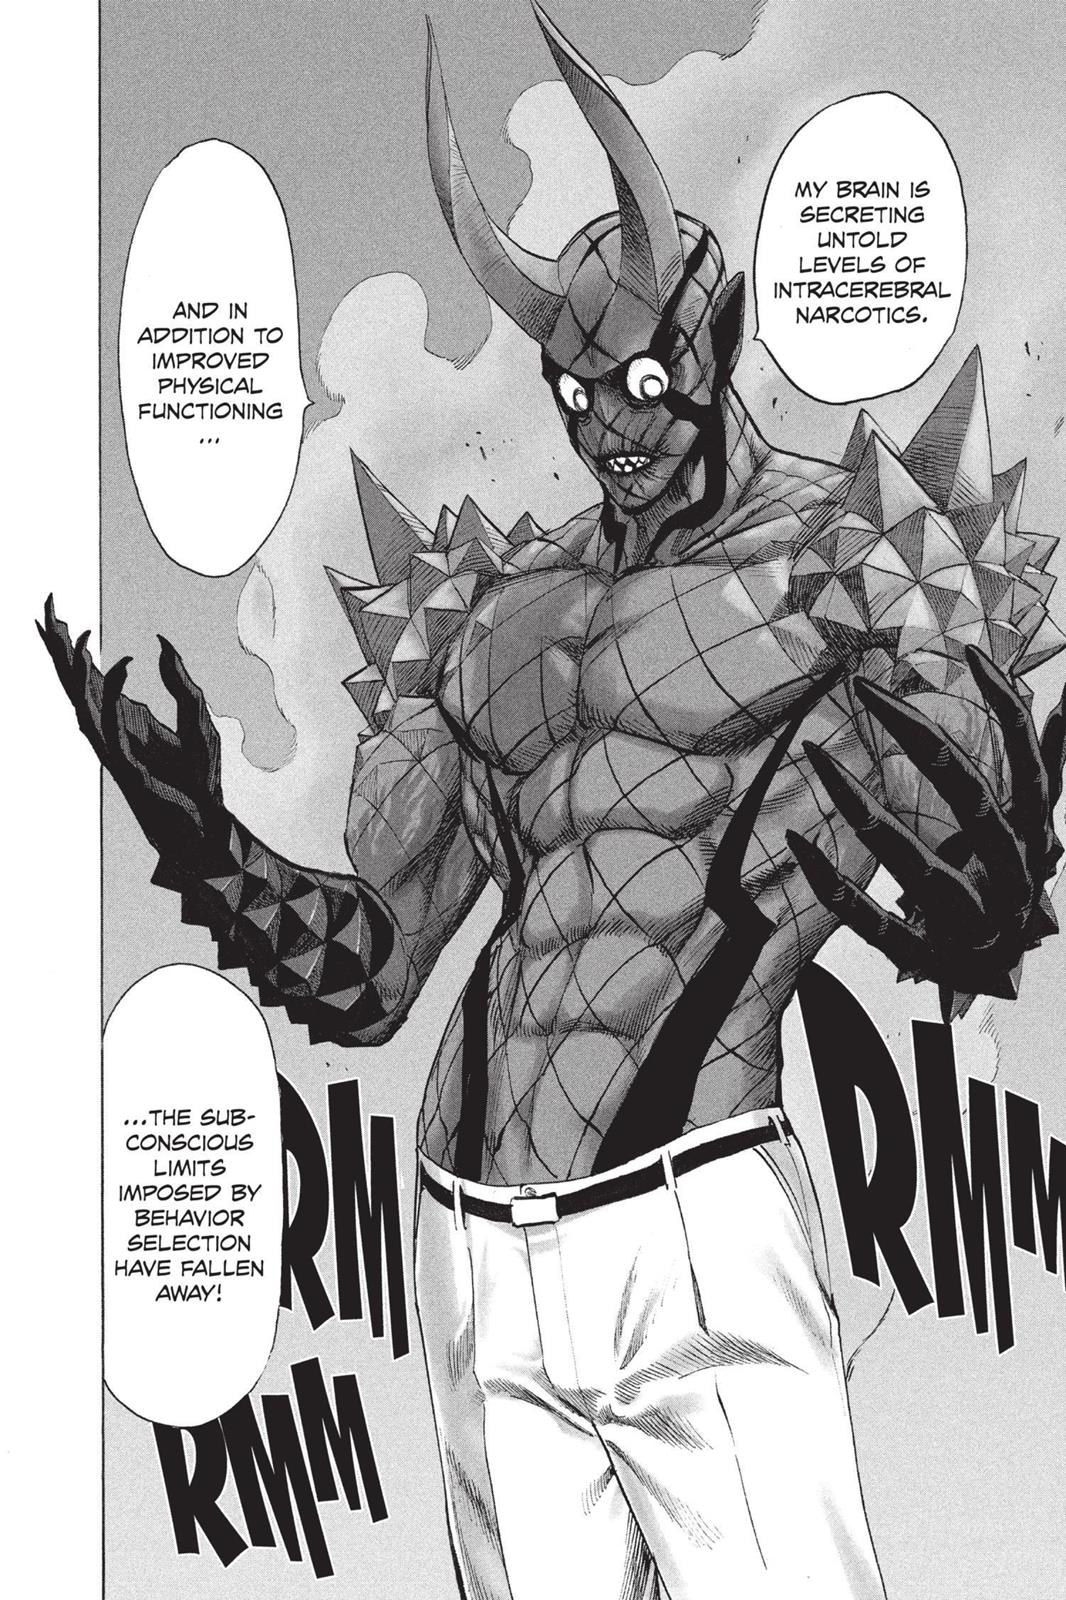 One-Punch Man, Punch 72 image 24